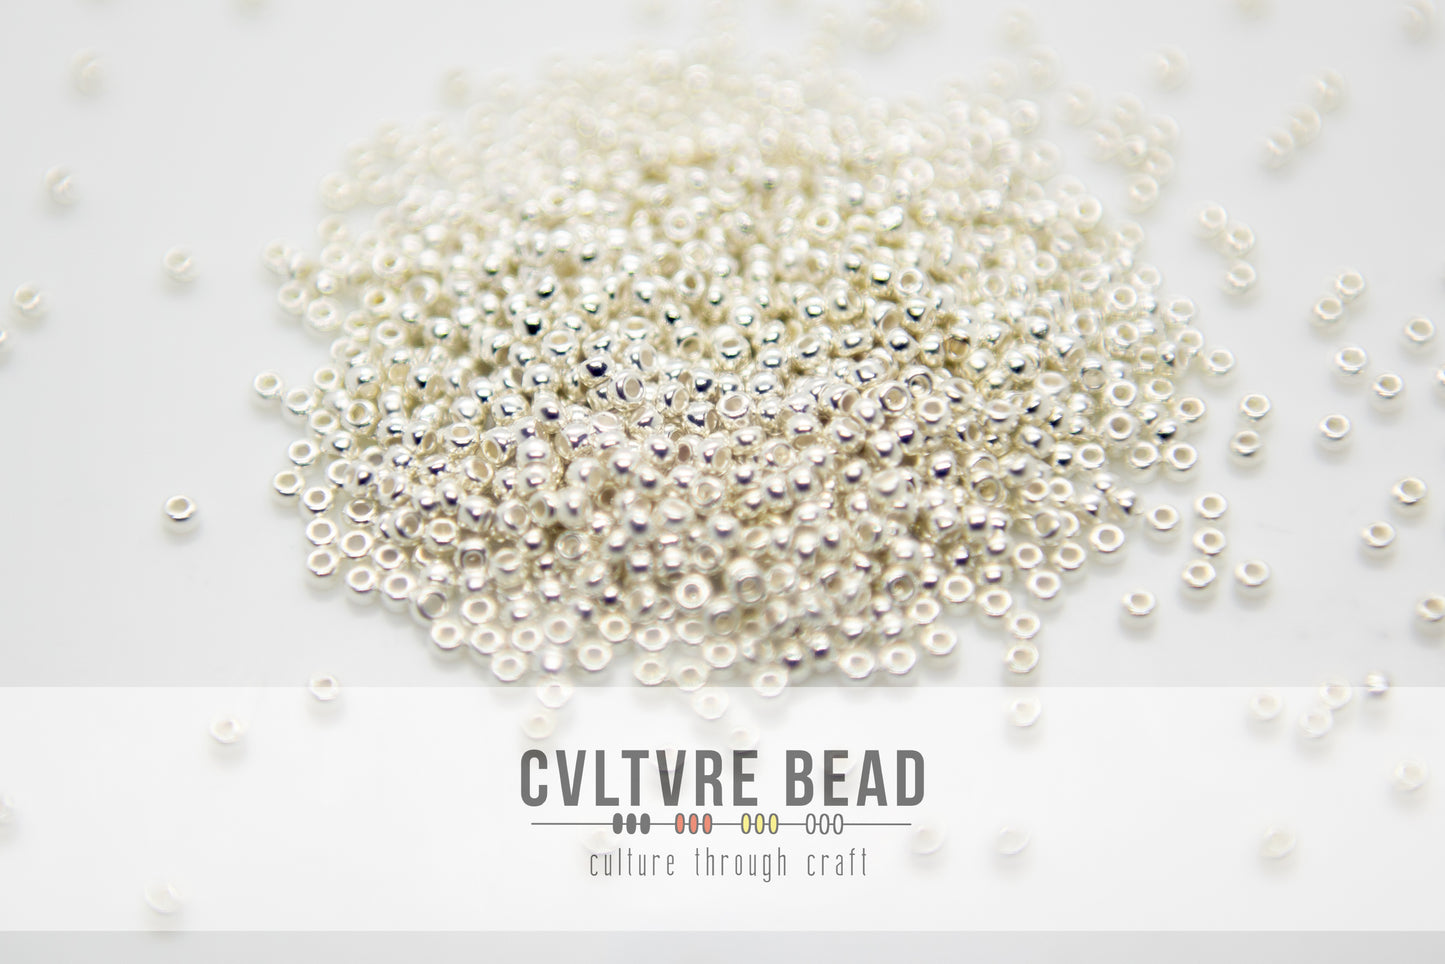 Czech Seed bead 11/0 .999 Fine Silver Plated, 8.1 grams